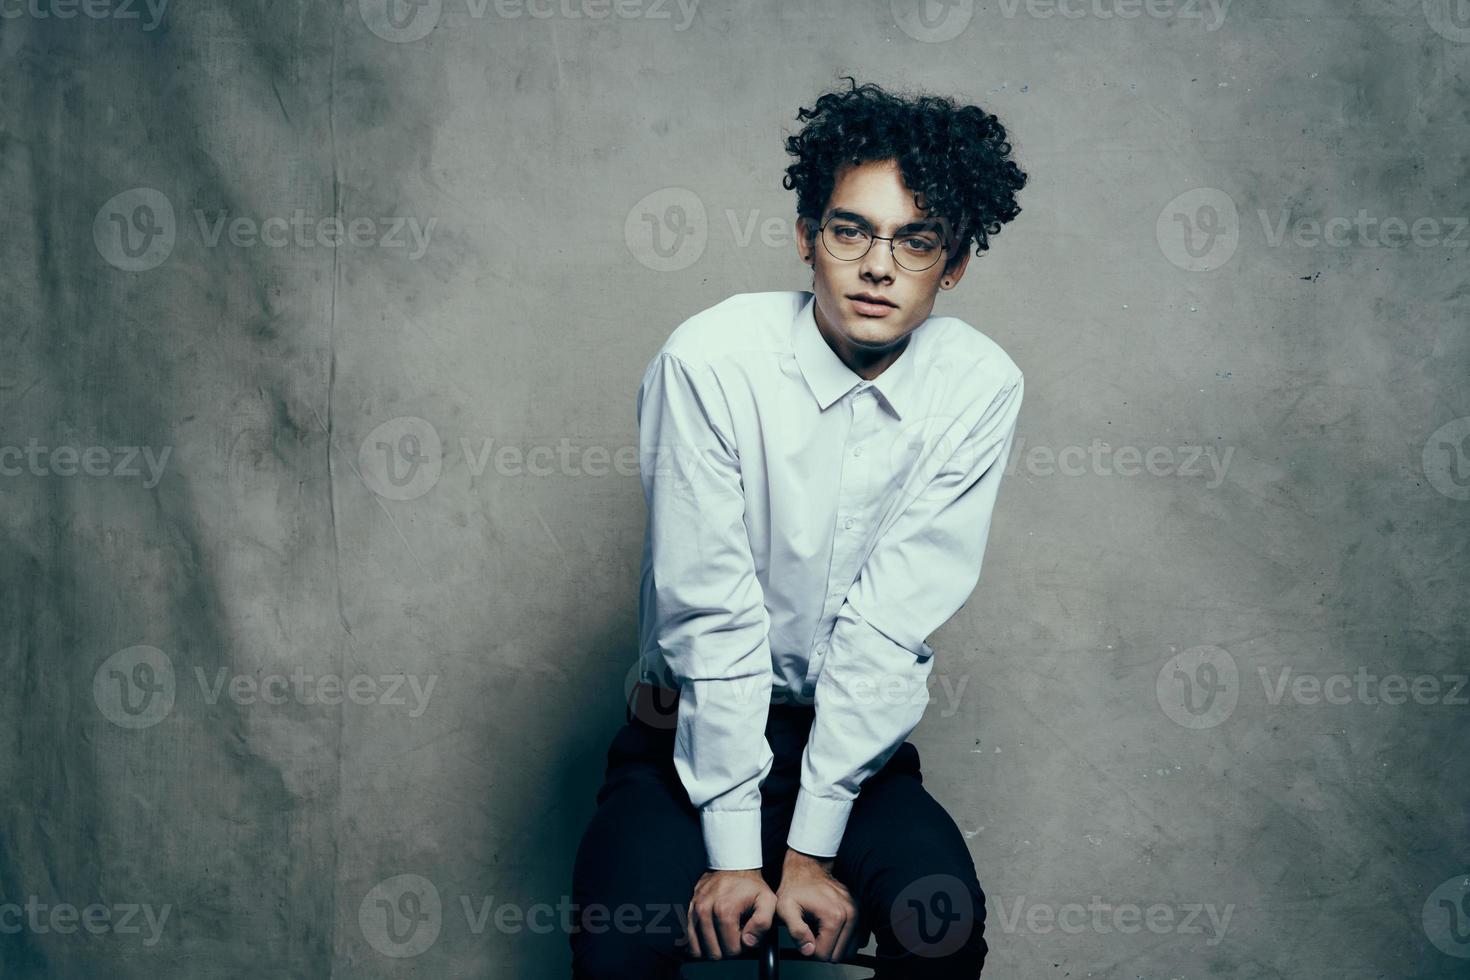 curly hair young man in shirt classic suit photography studio model on fabric background photo